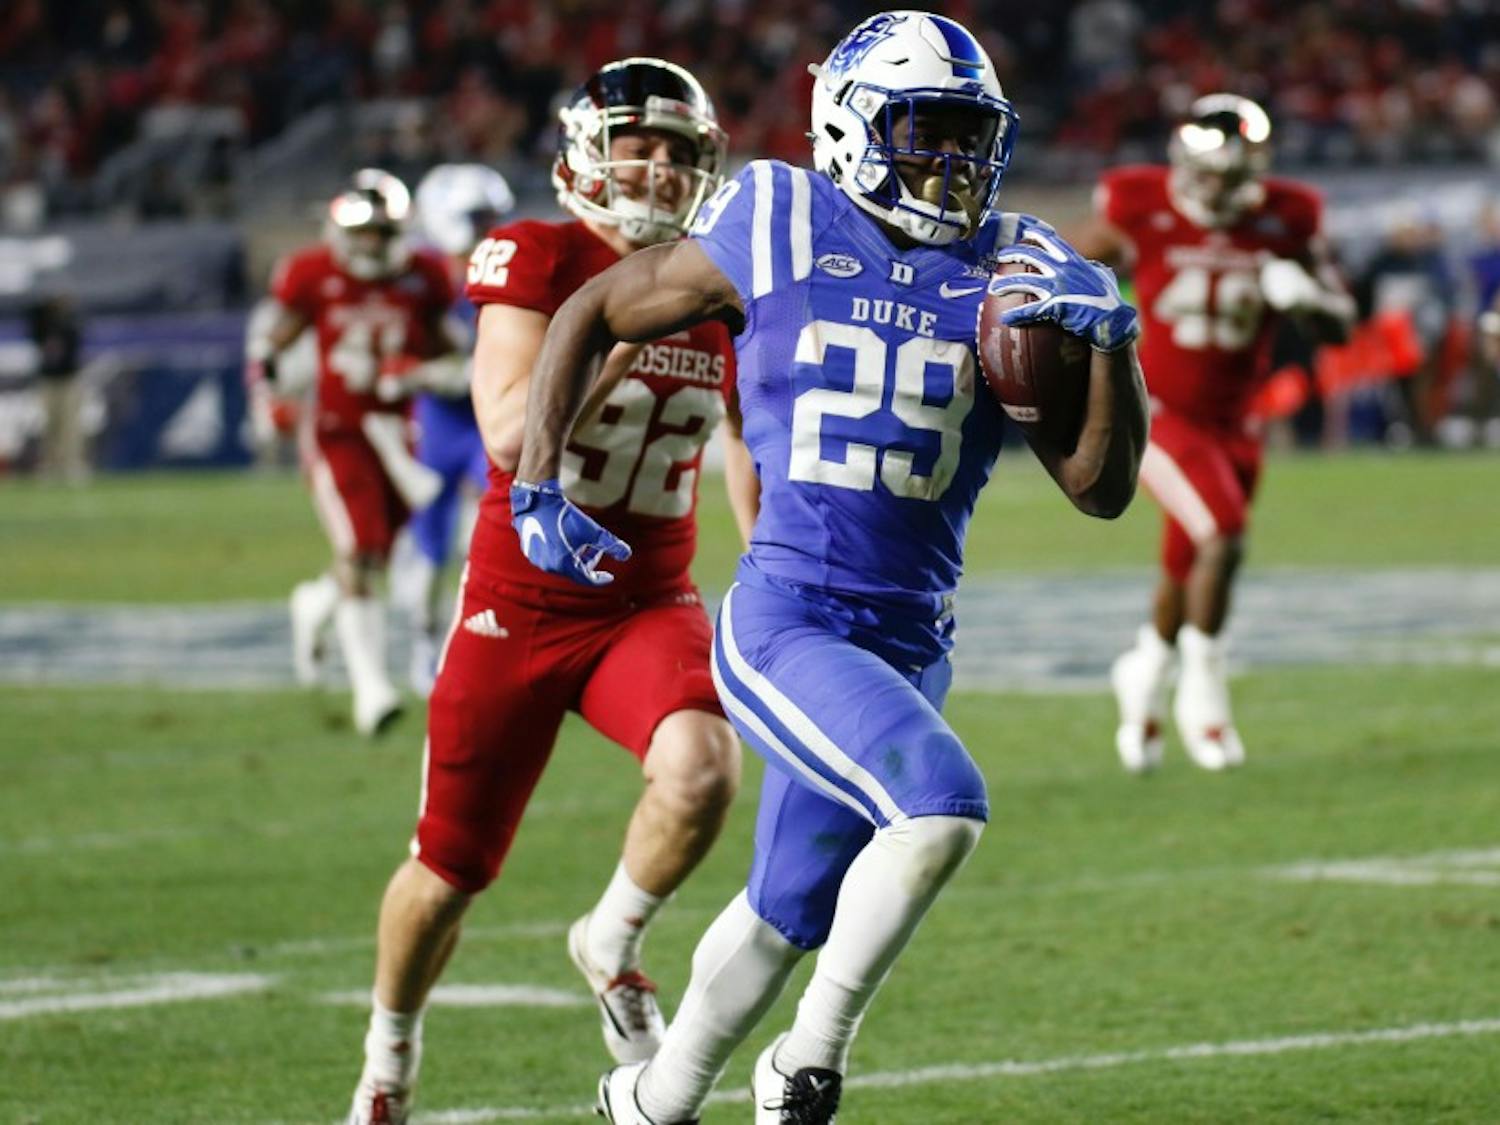 Sophomore speedster Shaun Wilson ran for 282 all-purpose yards Saturday, including touchdowns of 85 and 98&nbsp;yards, both of which came at critical times.